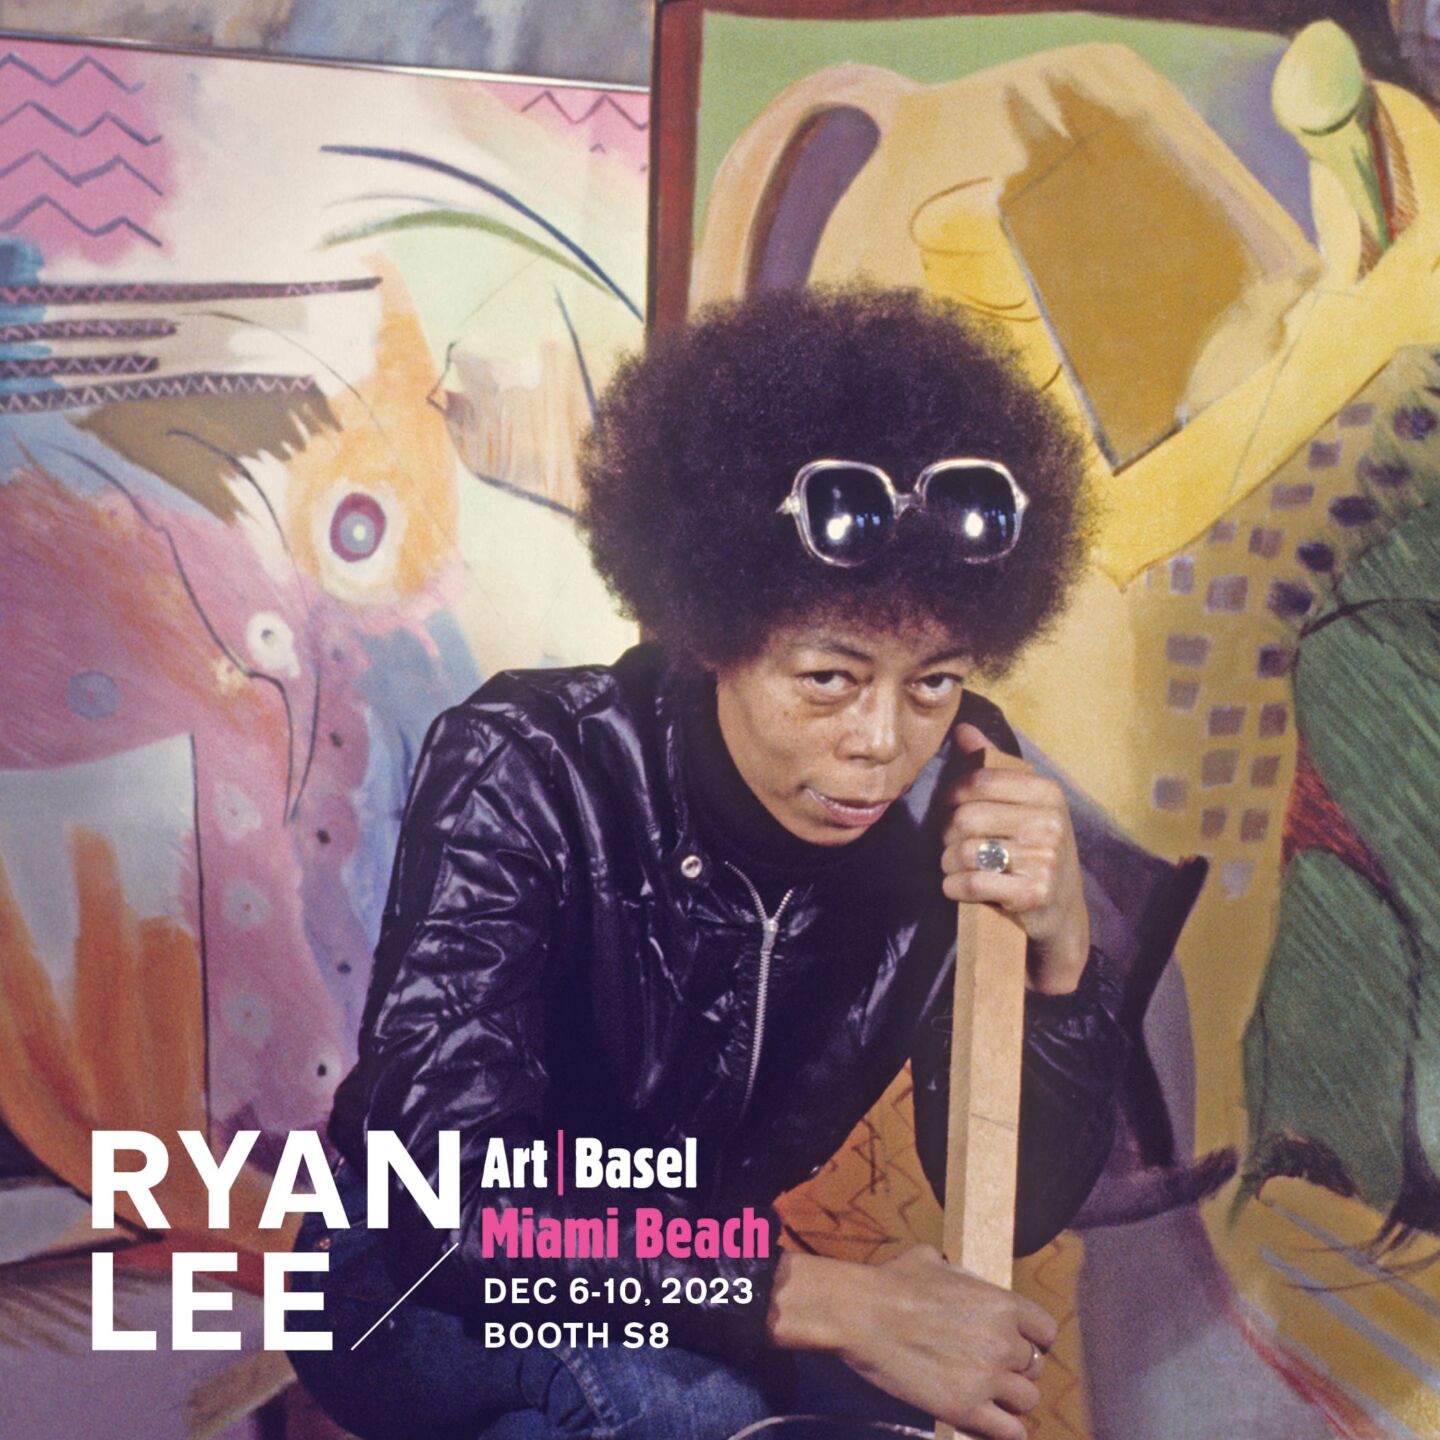 A woman crouches in front of large canvases and stare straight at the camera. Embedded in the image is the RYAN LEE logo and the text: Art Basel Miami Beach, Dec 6-10, 2023. Booth S8